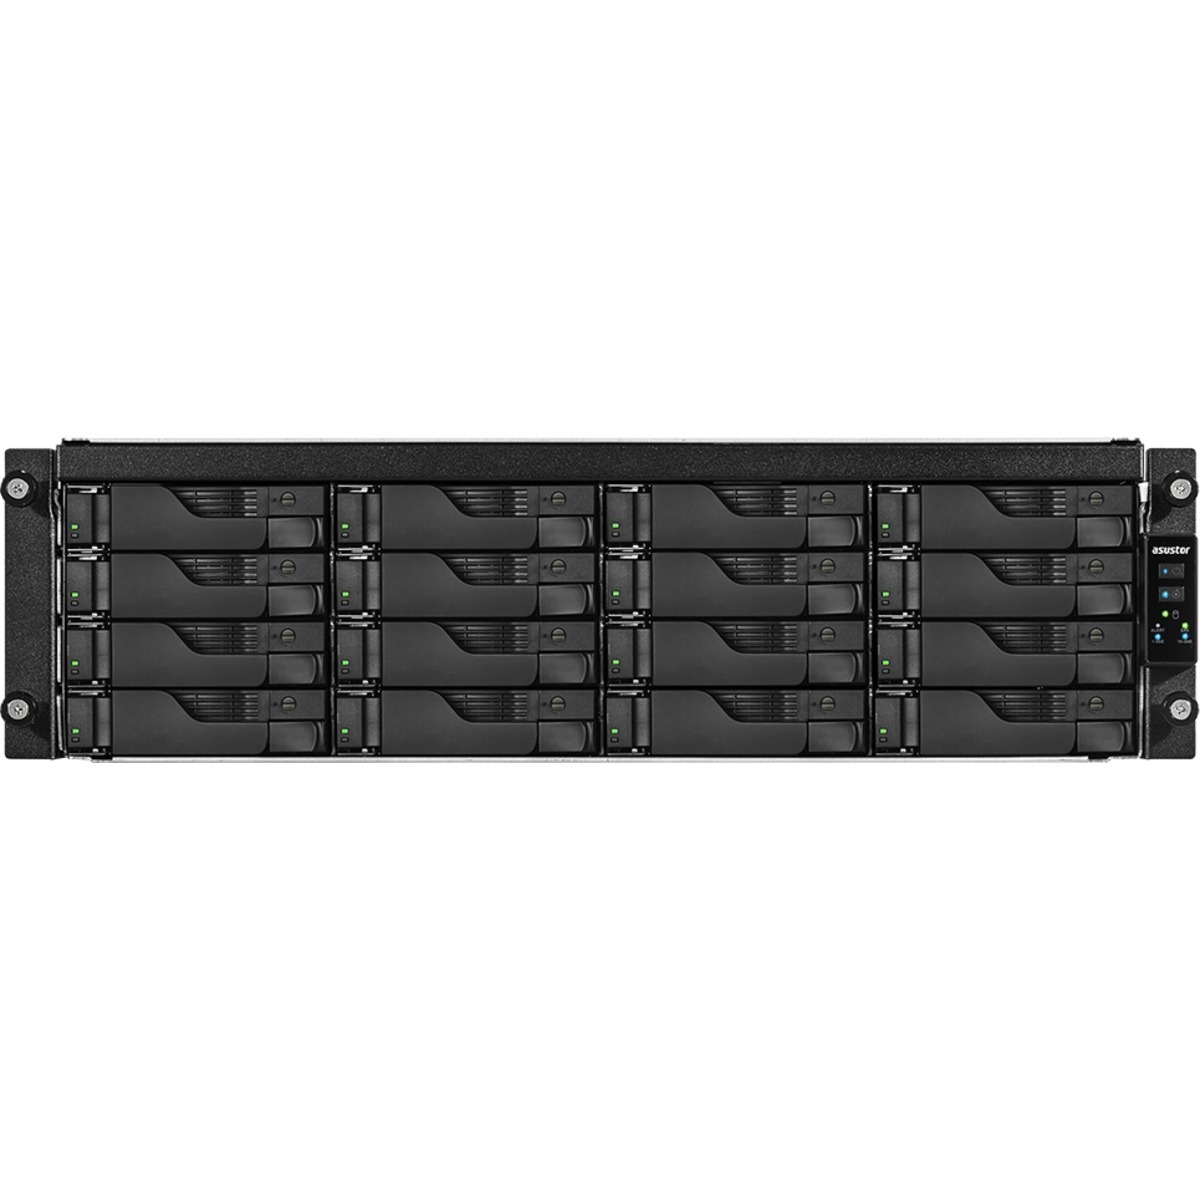 buy $10426 ASUSTOR AS7116RDX Lockerstor 16R Pro 32tb RackMount NAS - Network Attached Storage Device 16x2000gb Western Digital Red SA500 WDS200T1R0A 2.5 SATA 6Gb/s SSD NAS Class Drives Installed - Burn-In Tested - nas headquarters buy network attached storage server device das new raid-5 free shipping usa AS7116RDX Lockerstor 16R Pro